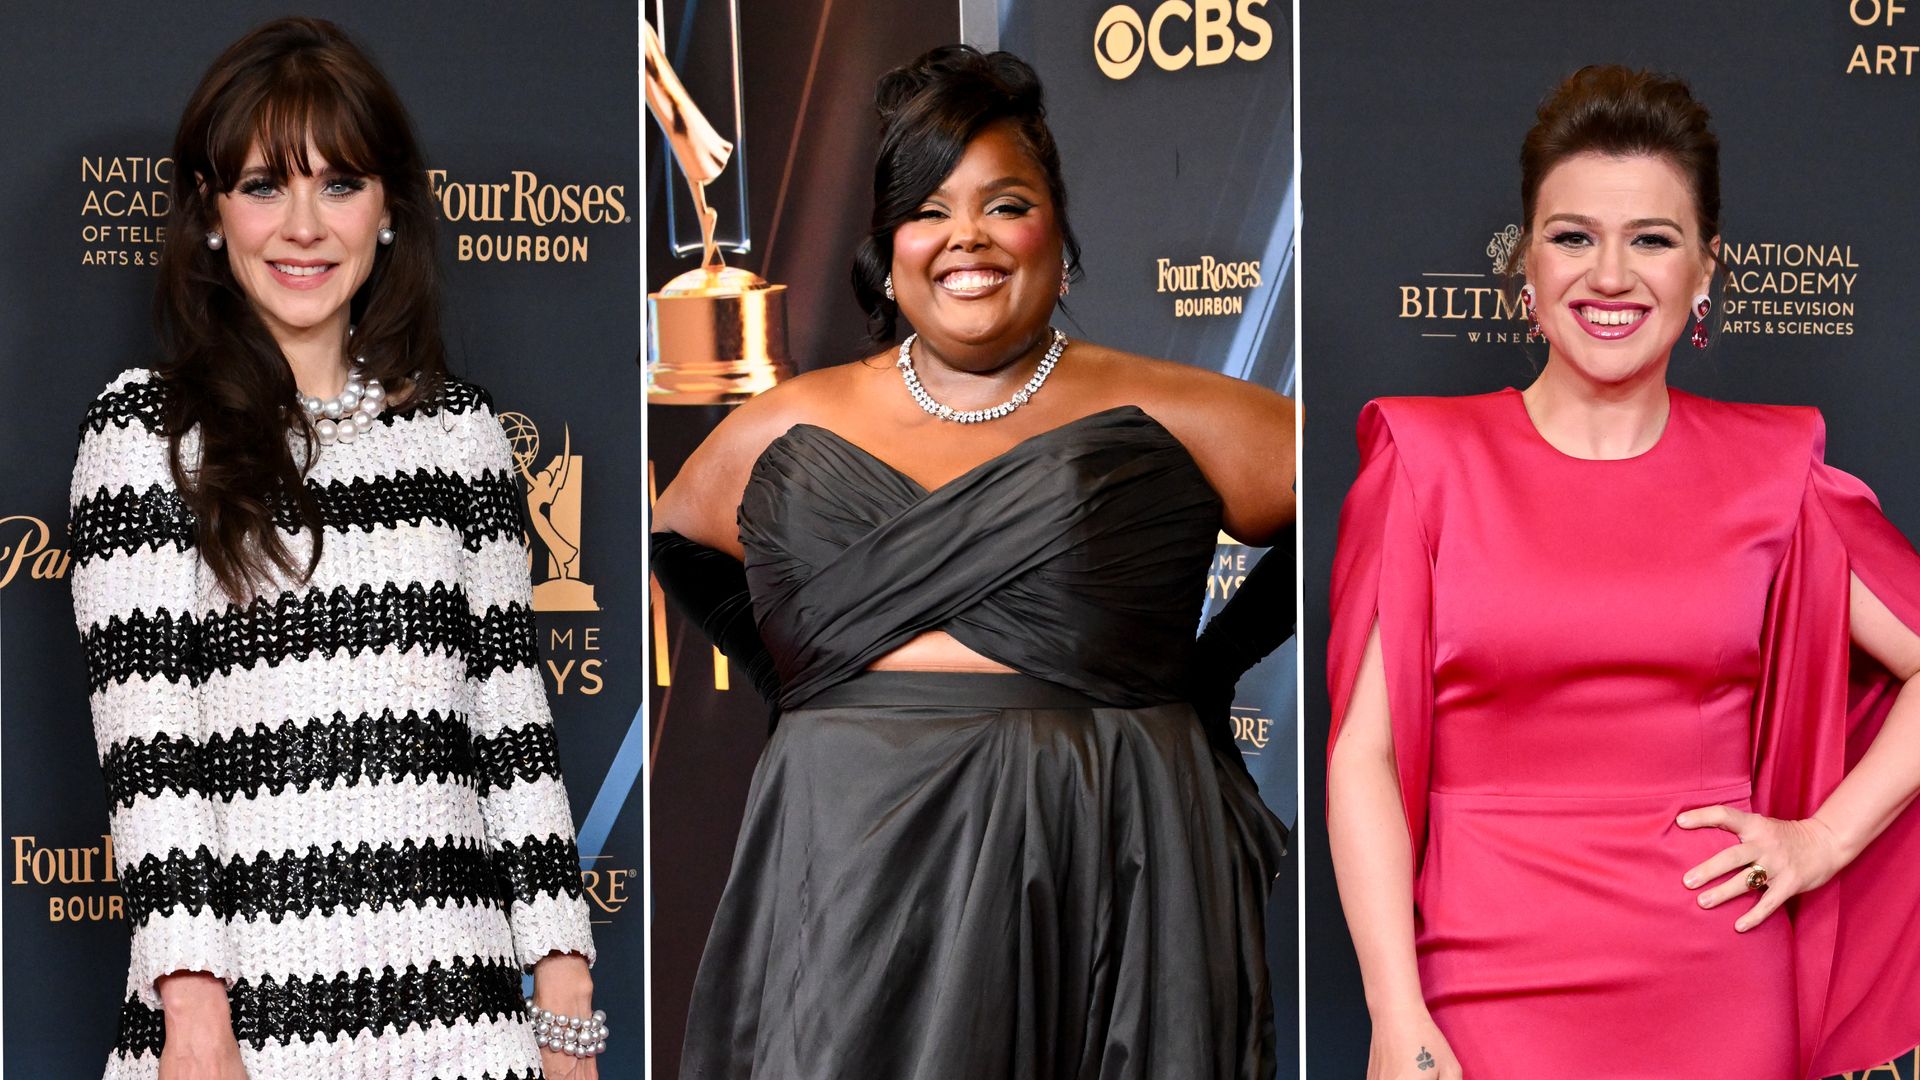 Daytime Emmy Awards: Kelly Clarkson and Zooey Deschanel lead the best dressed on the red carpet